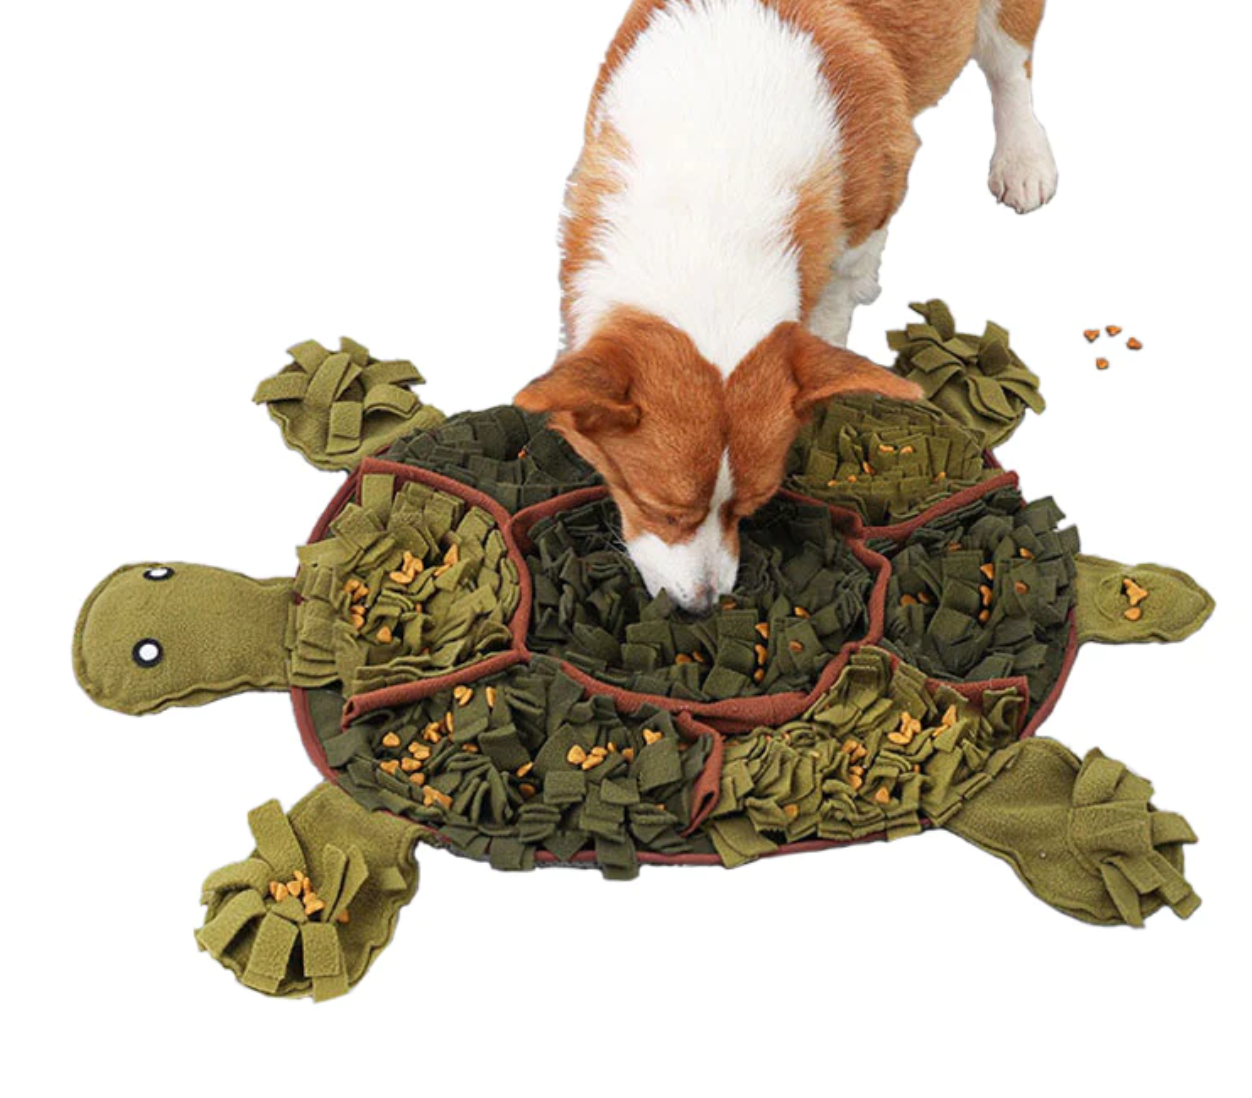 What is a snuffle mat? Are they a good enrichment toy for dogs?